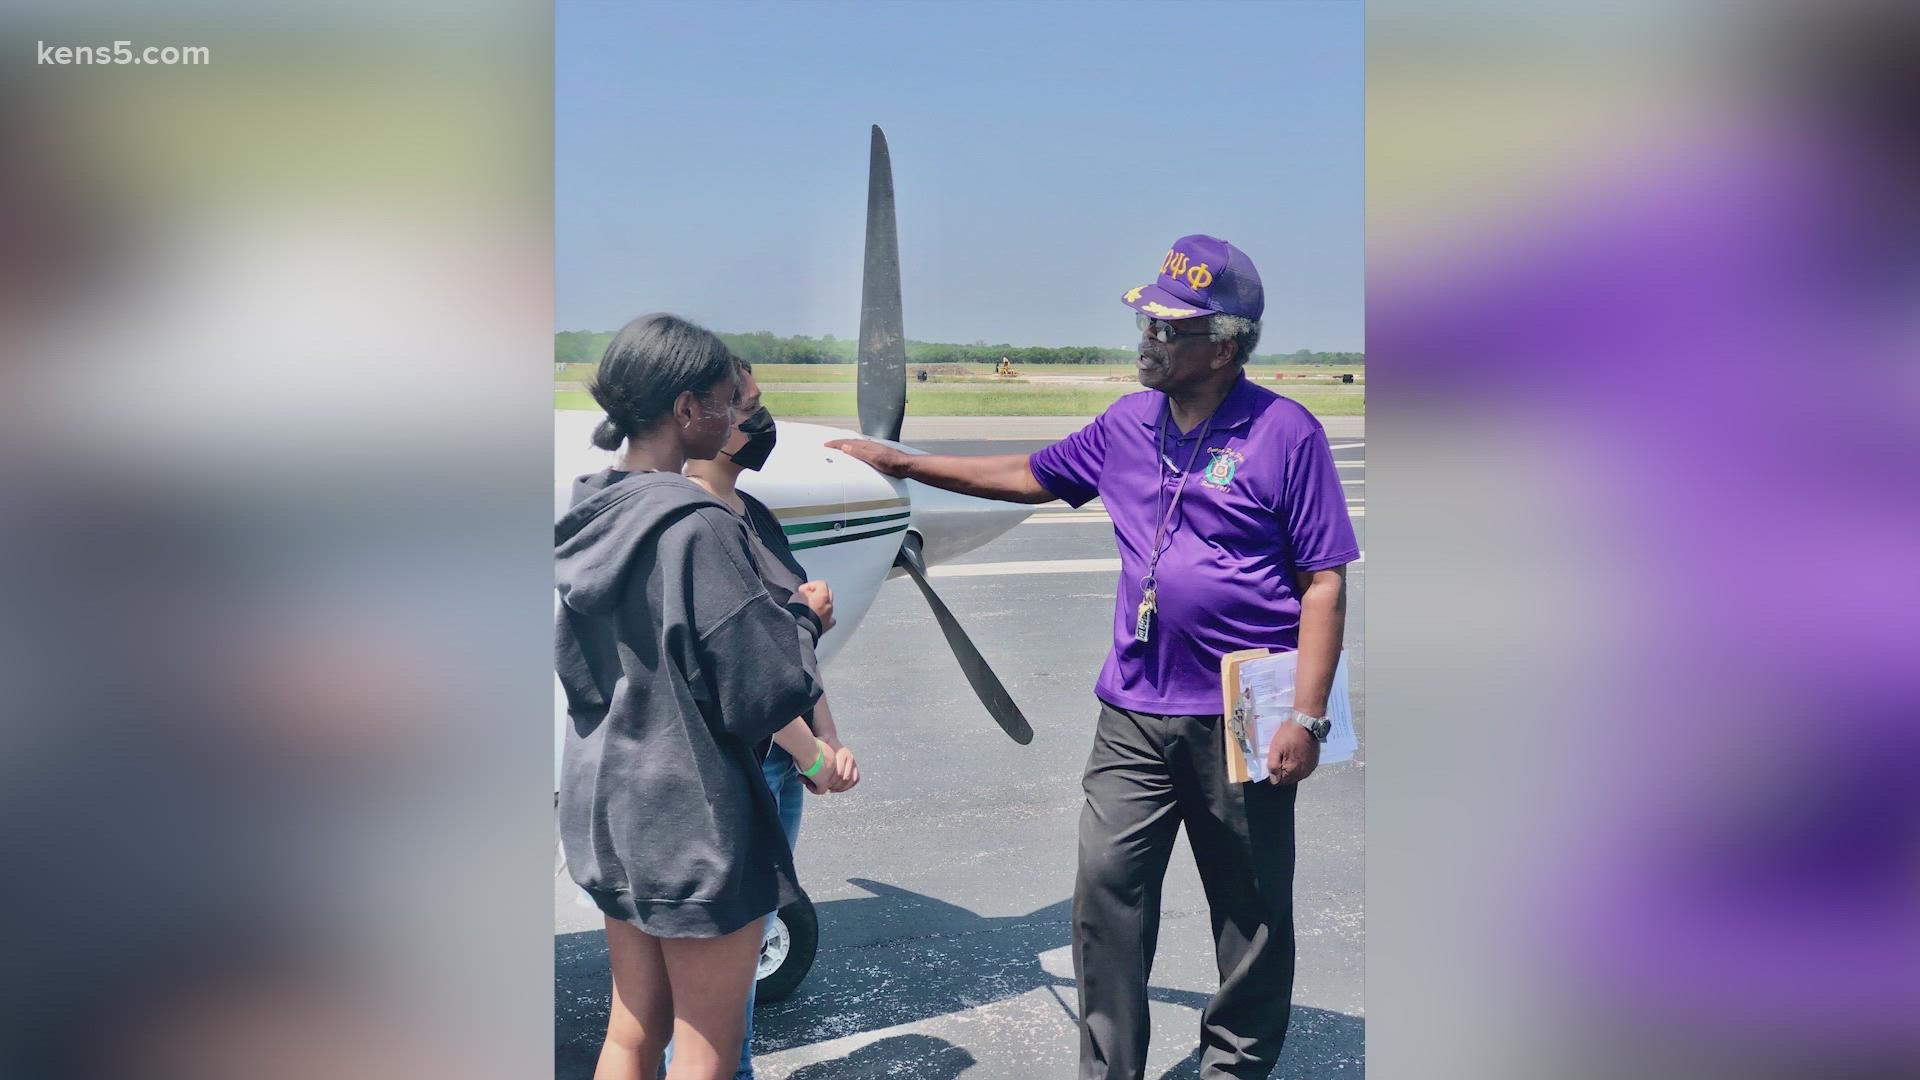 The annual "Youth Fly-In" introduces minority and disadvantaged youth to careers in aviation and even the thrill of flying an airplane.